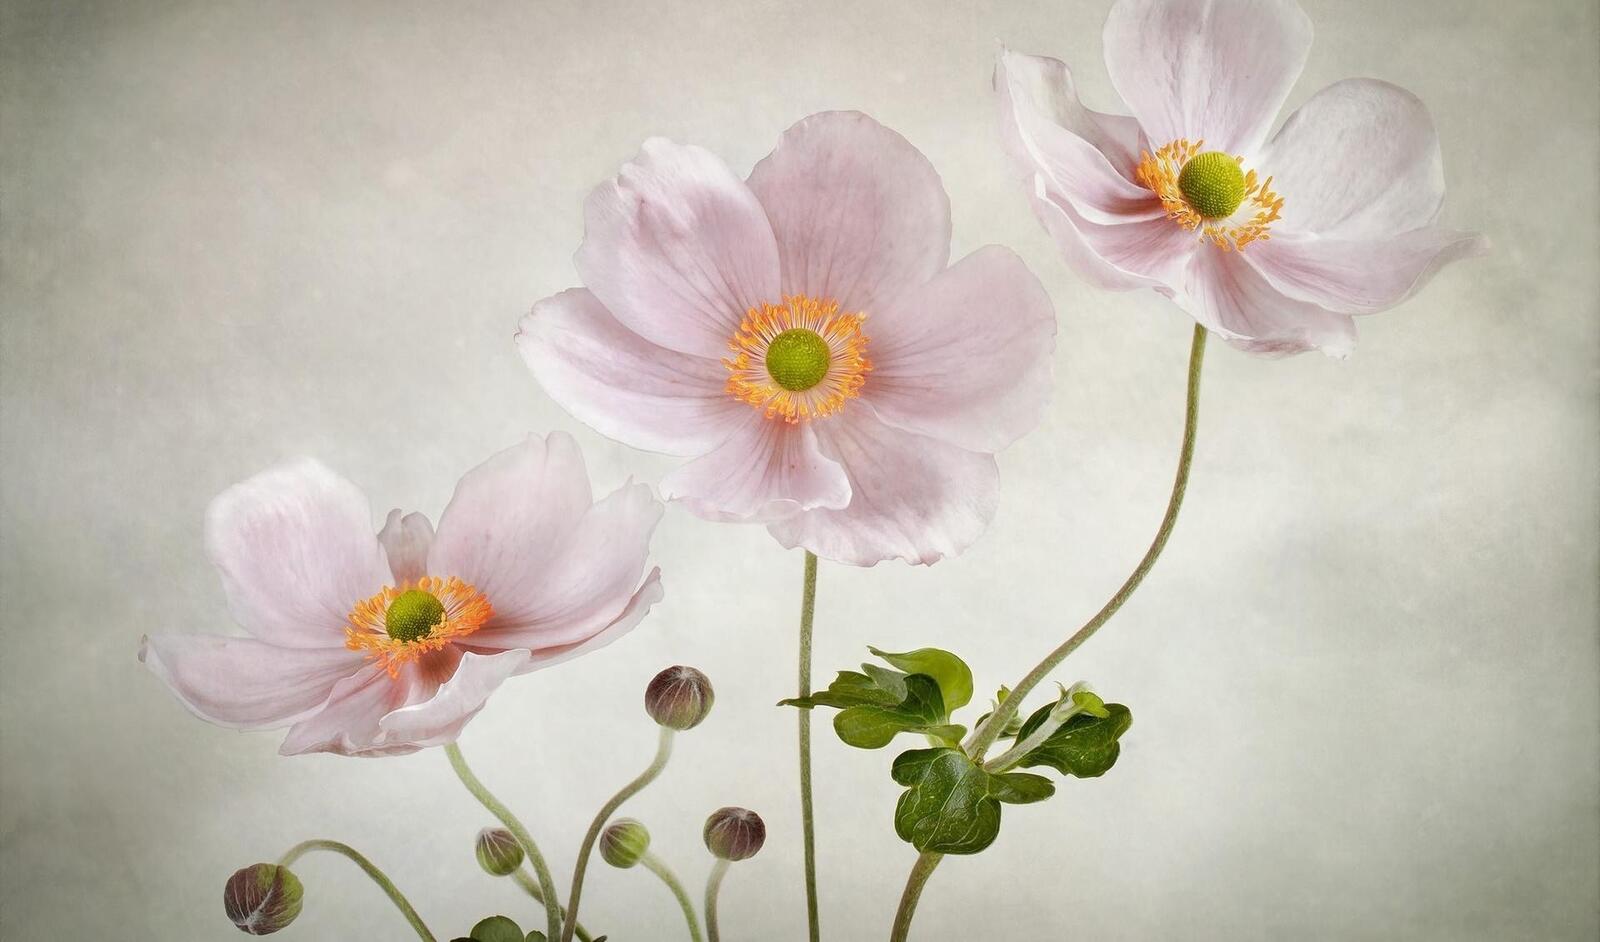 Wallpapers buds wallpaper pink anemone flowers on the desktop